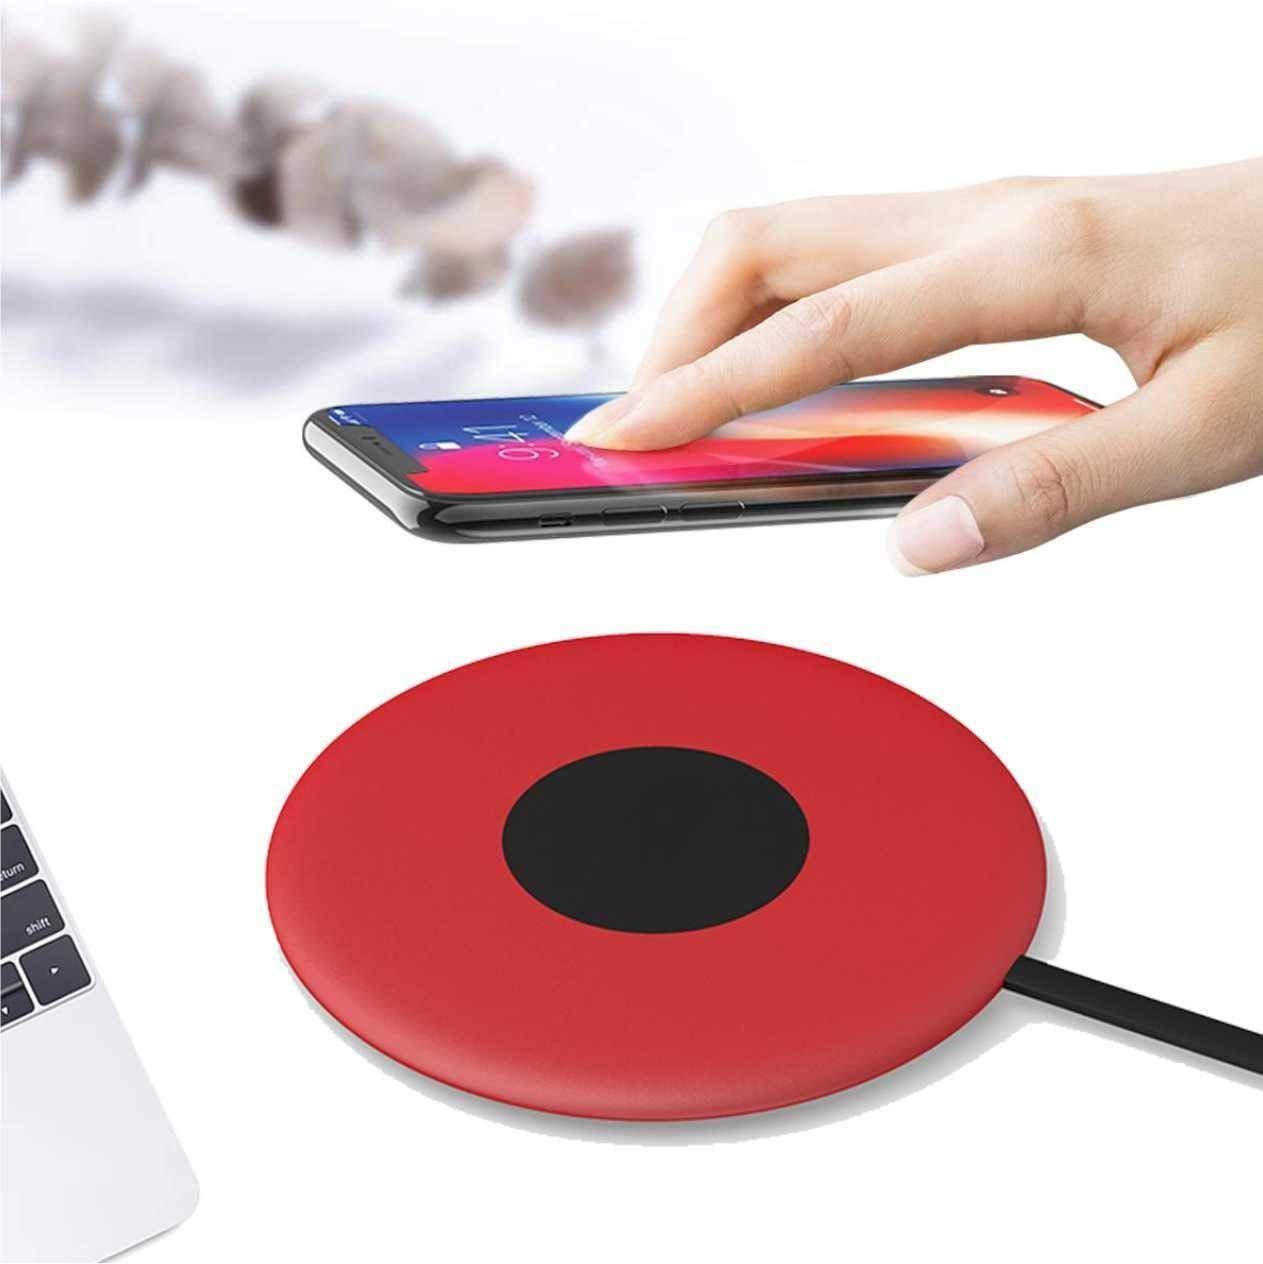 Pebble Sense Wireless Charging Pad 10W with Smart temprature Control PWLP1-Chargers-dealsplant